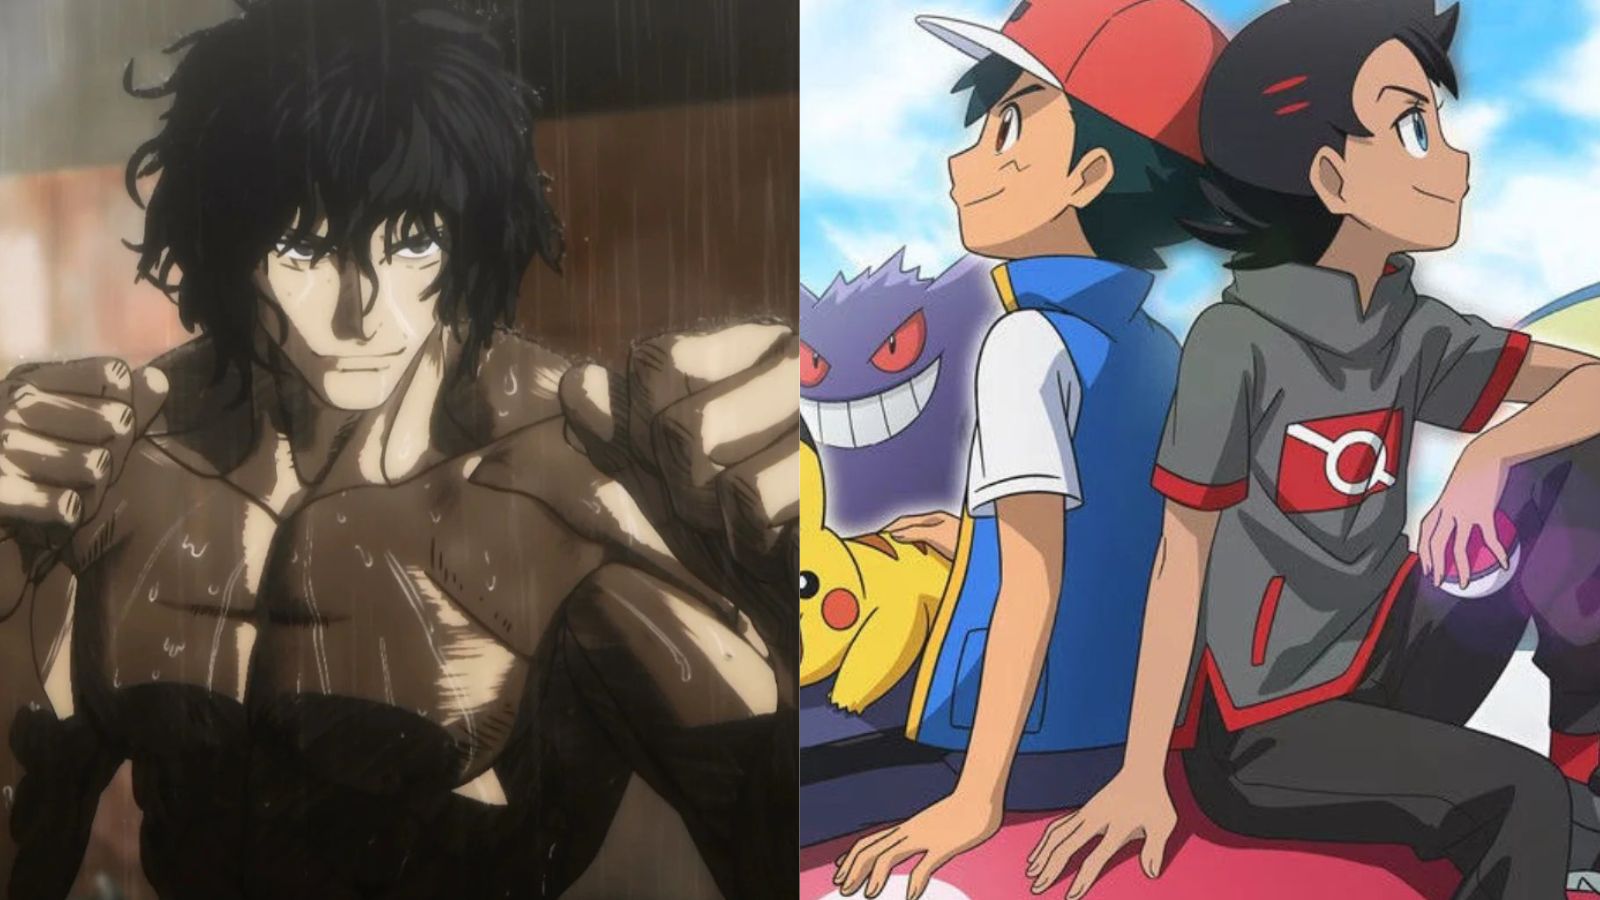 Upcoming Pokémon 2023 anime announces four more characters and cast members